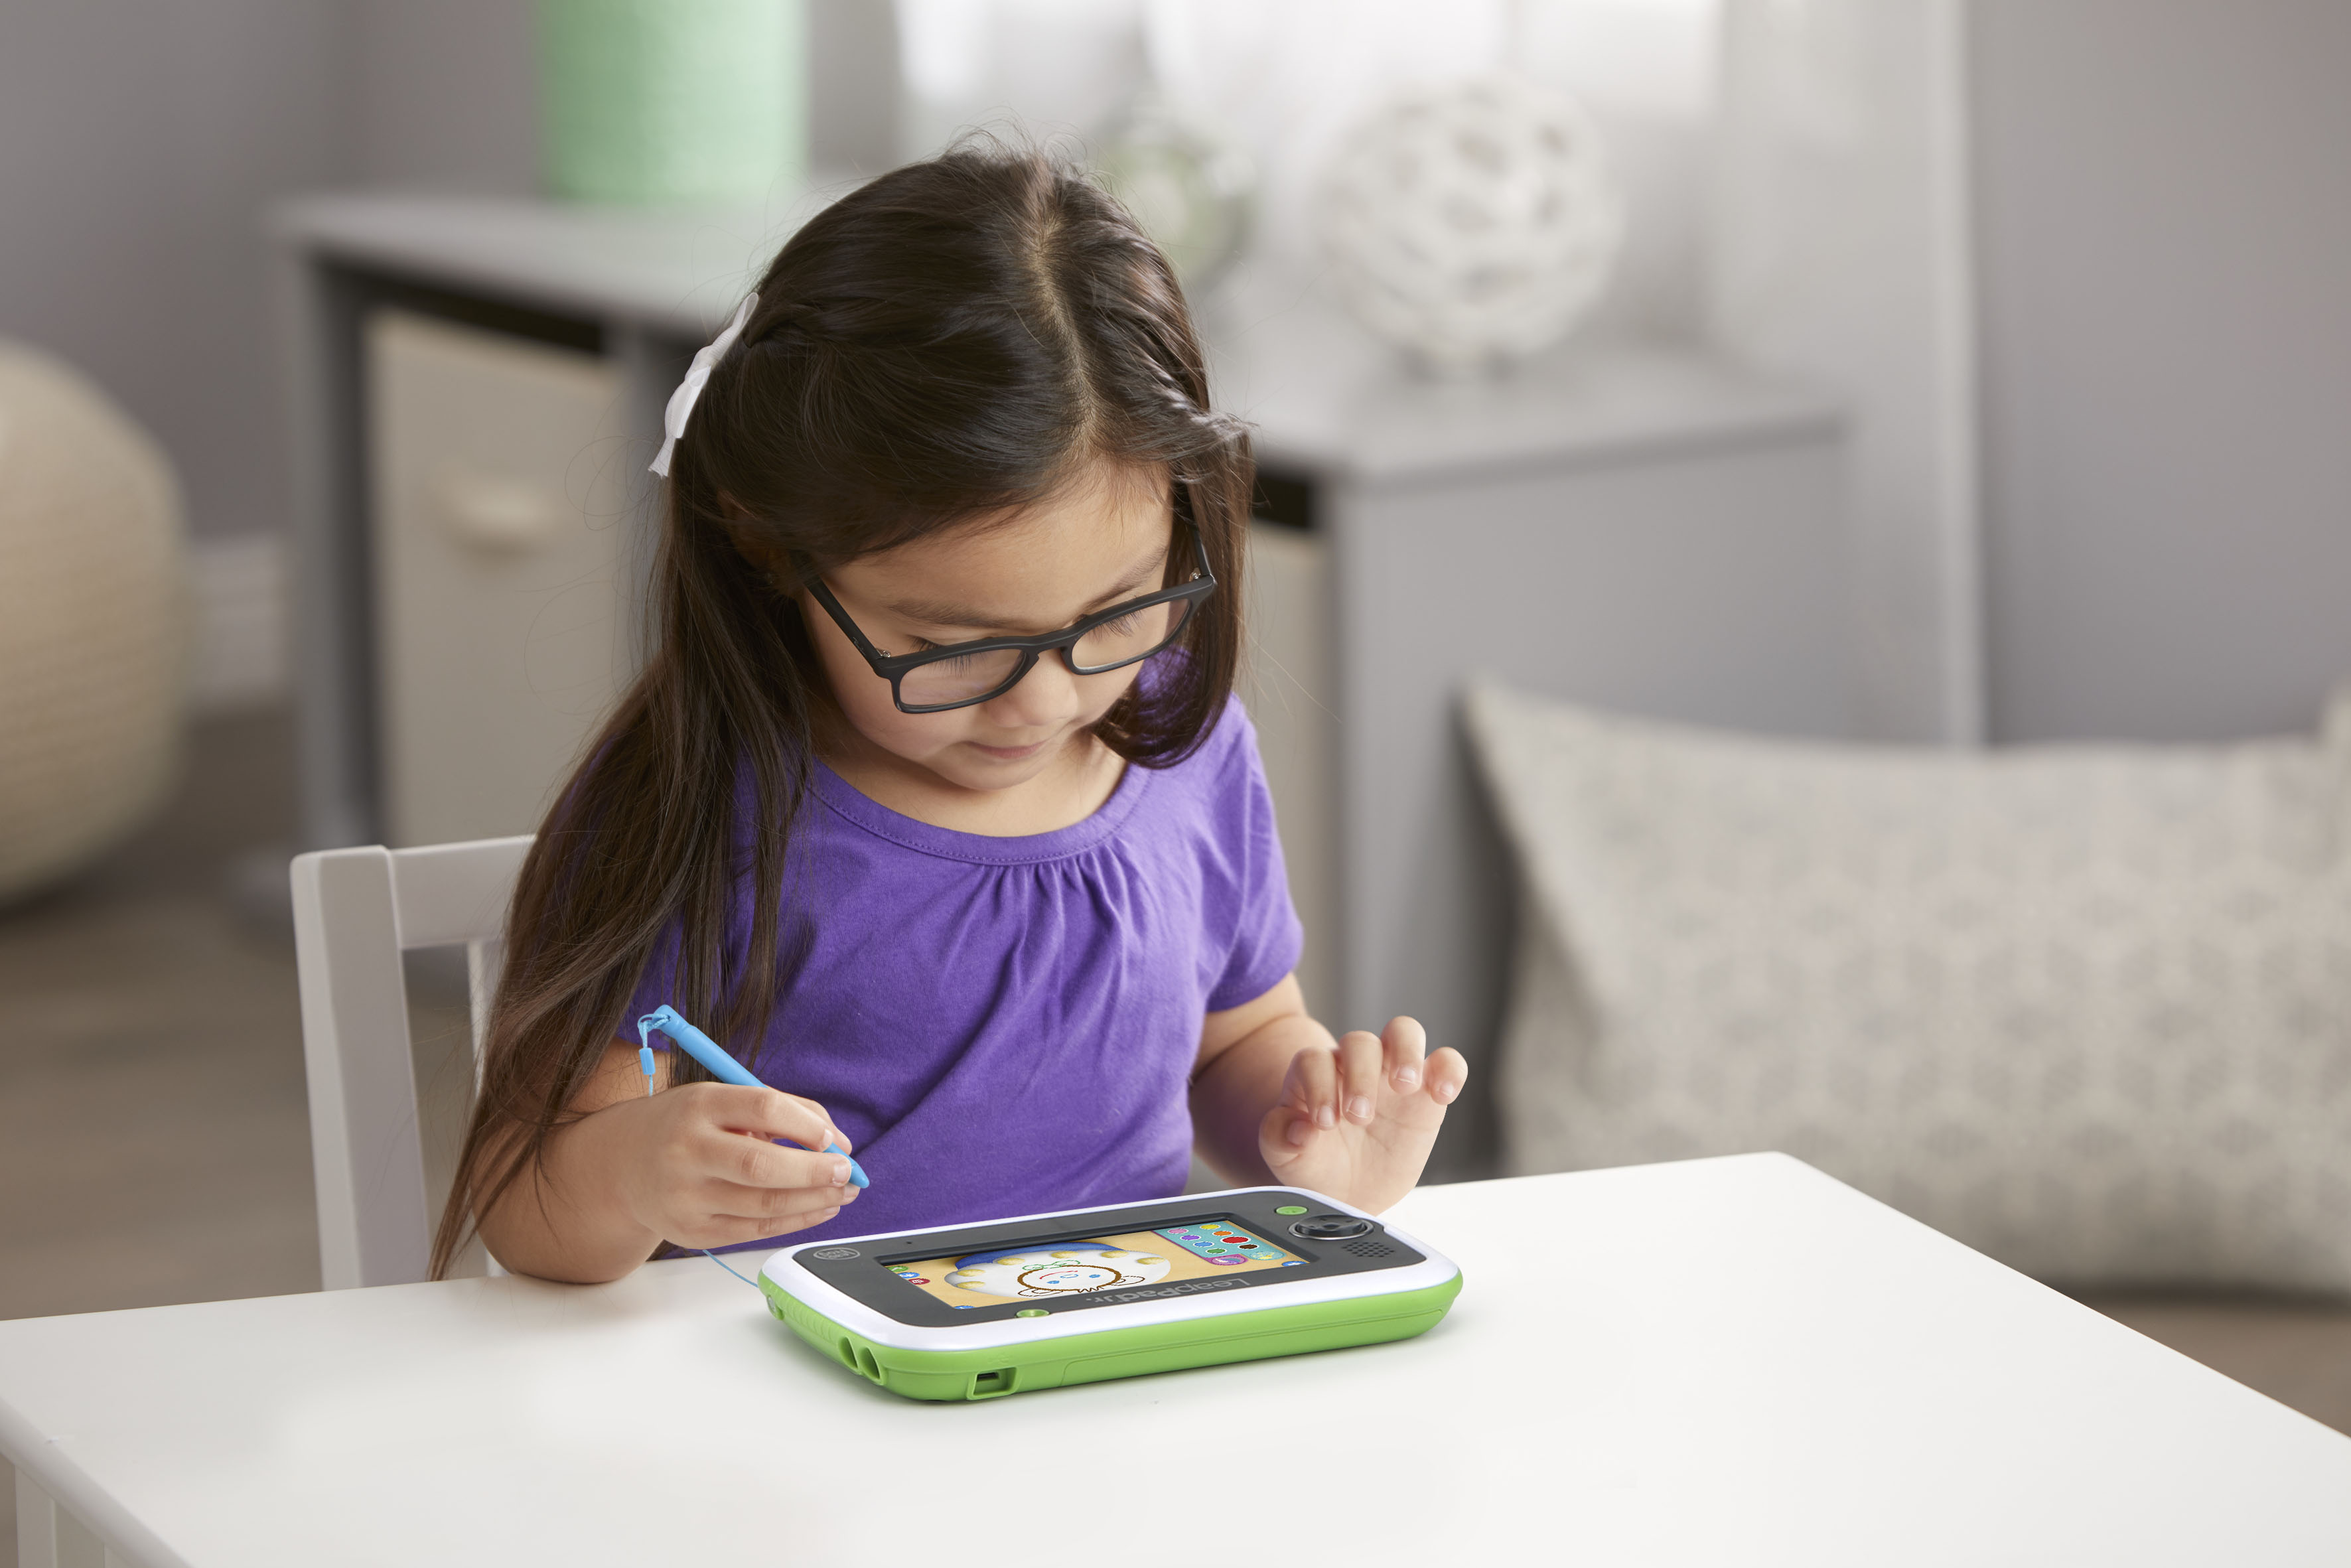 LeapFrog LeapPad Jr. Kid-Friendly Tablet Packed With Learning Games and Apps - image 4 of 10